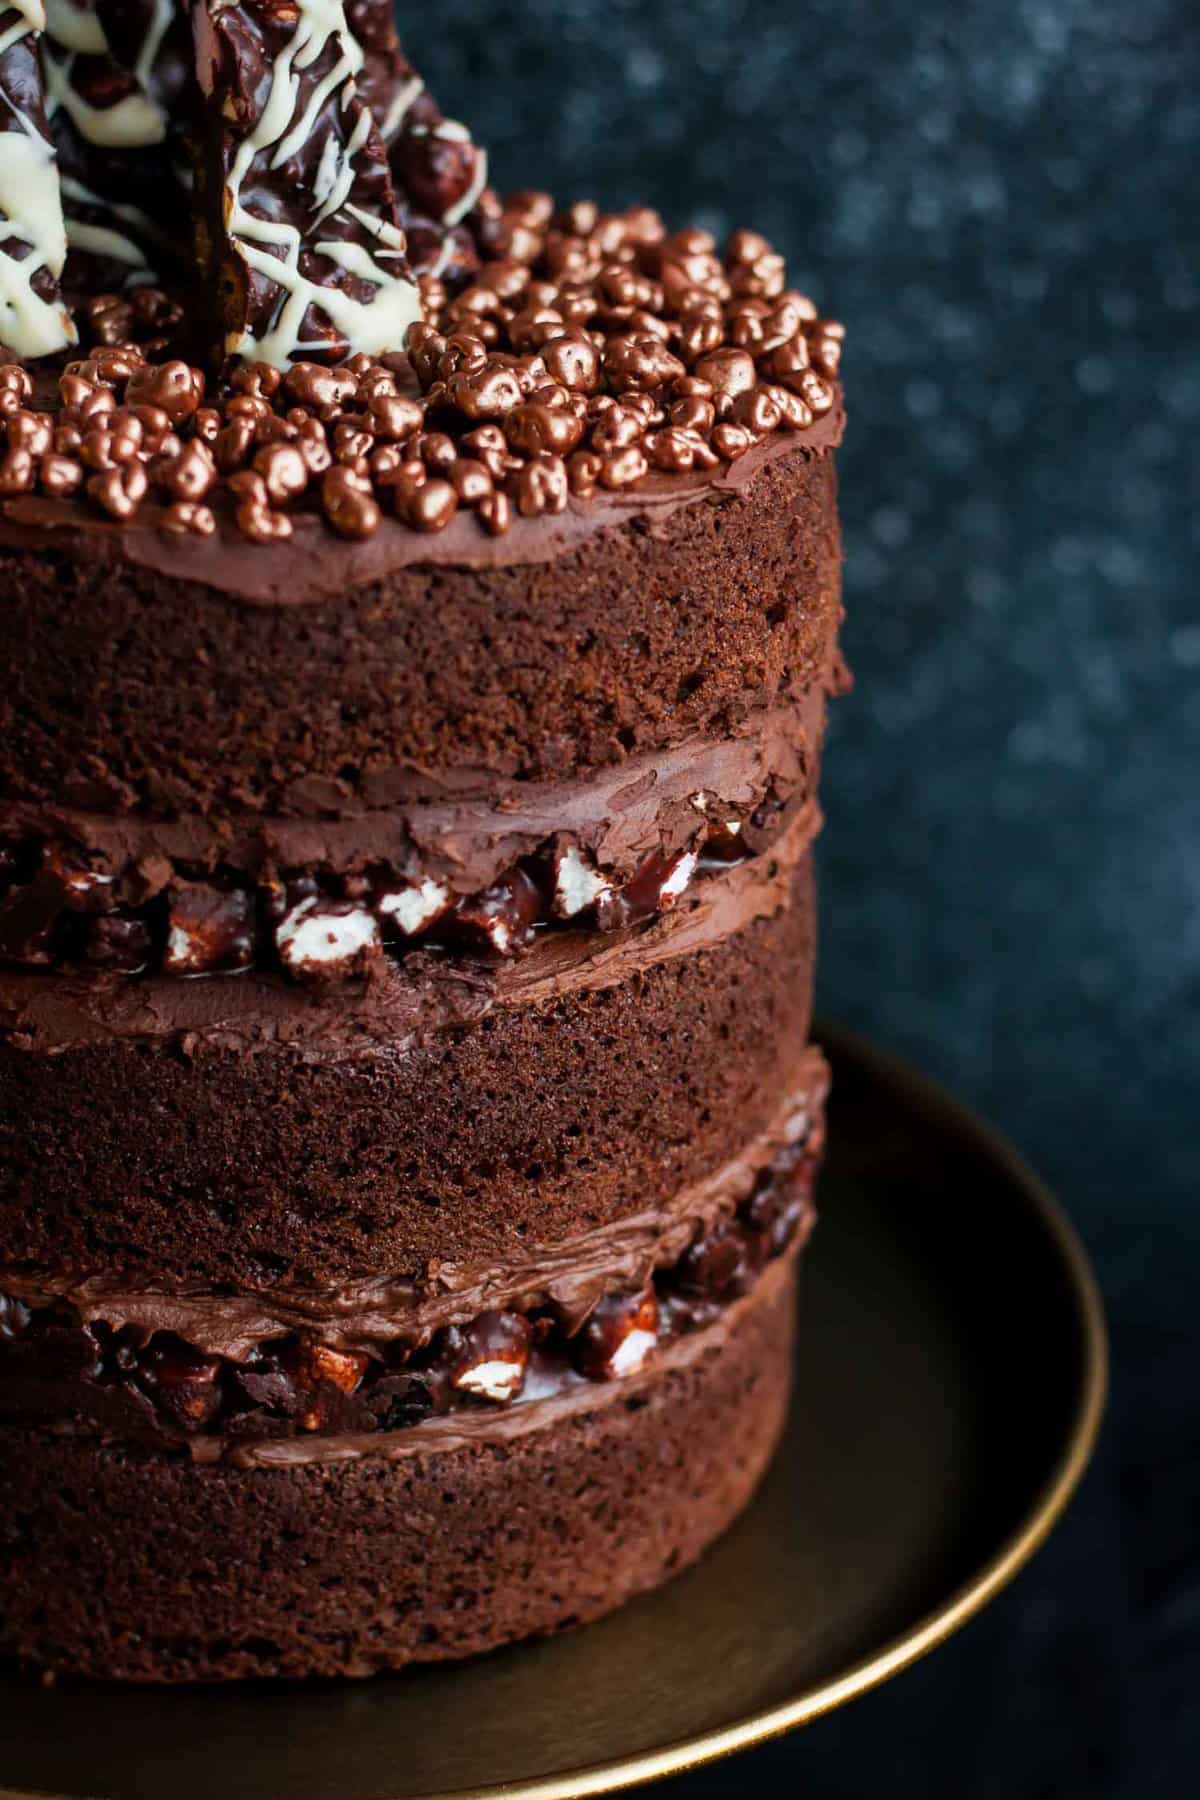 A close up of the chocolate ganache layers of a rocky road cake.